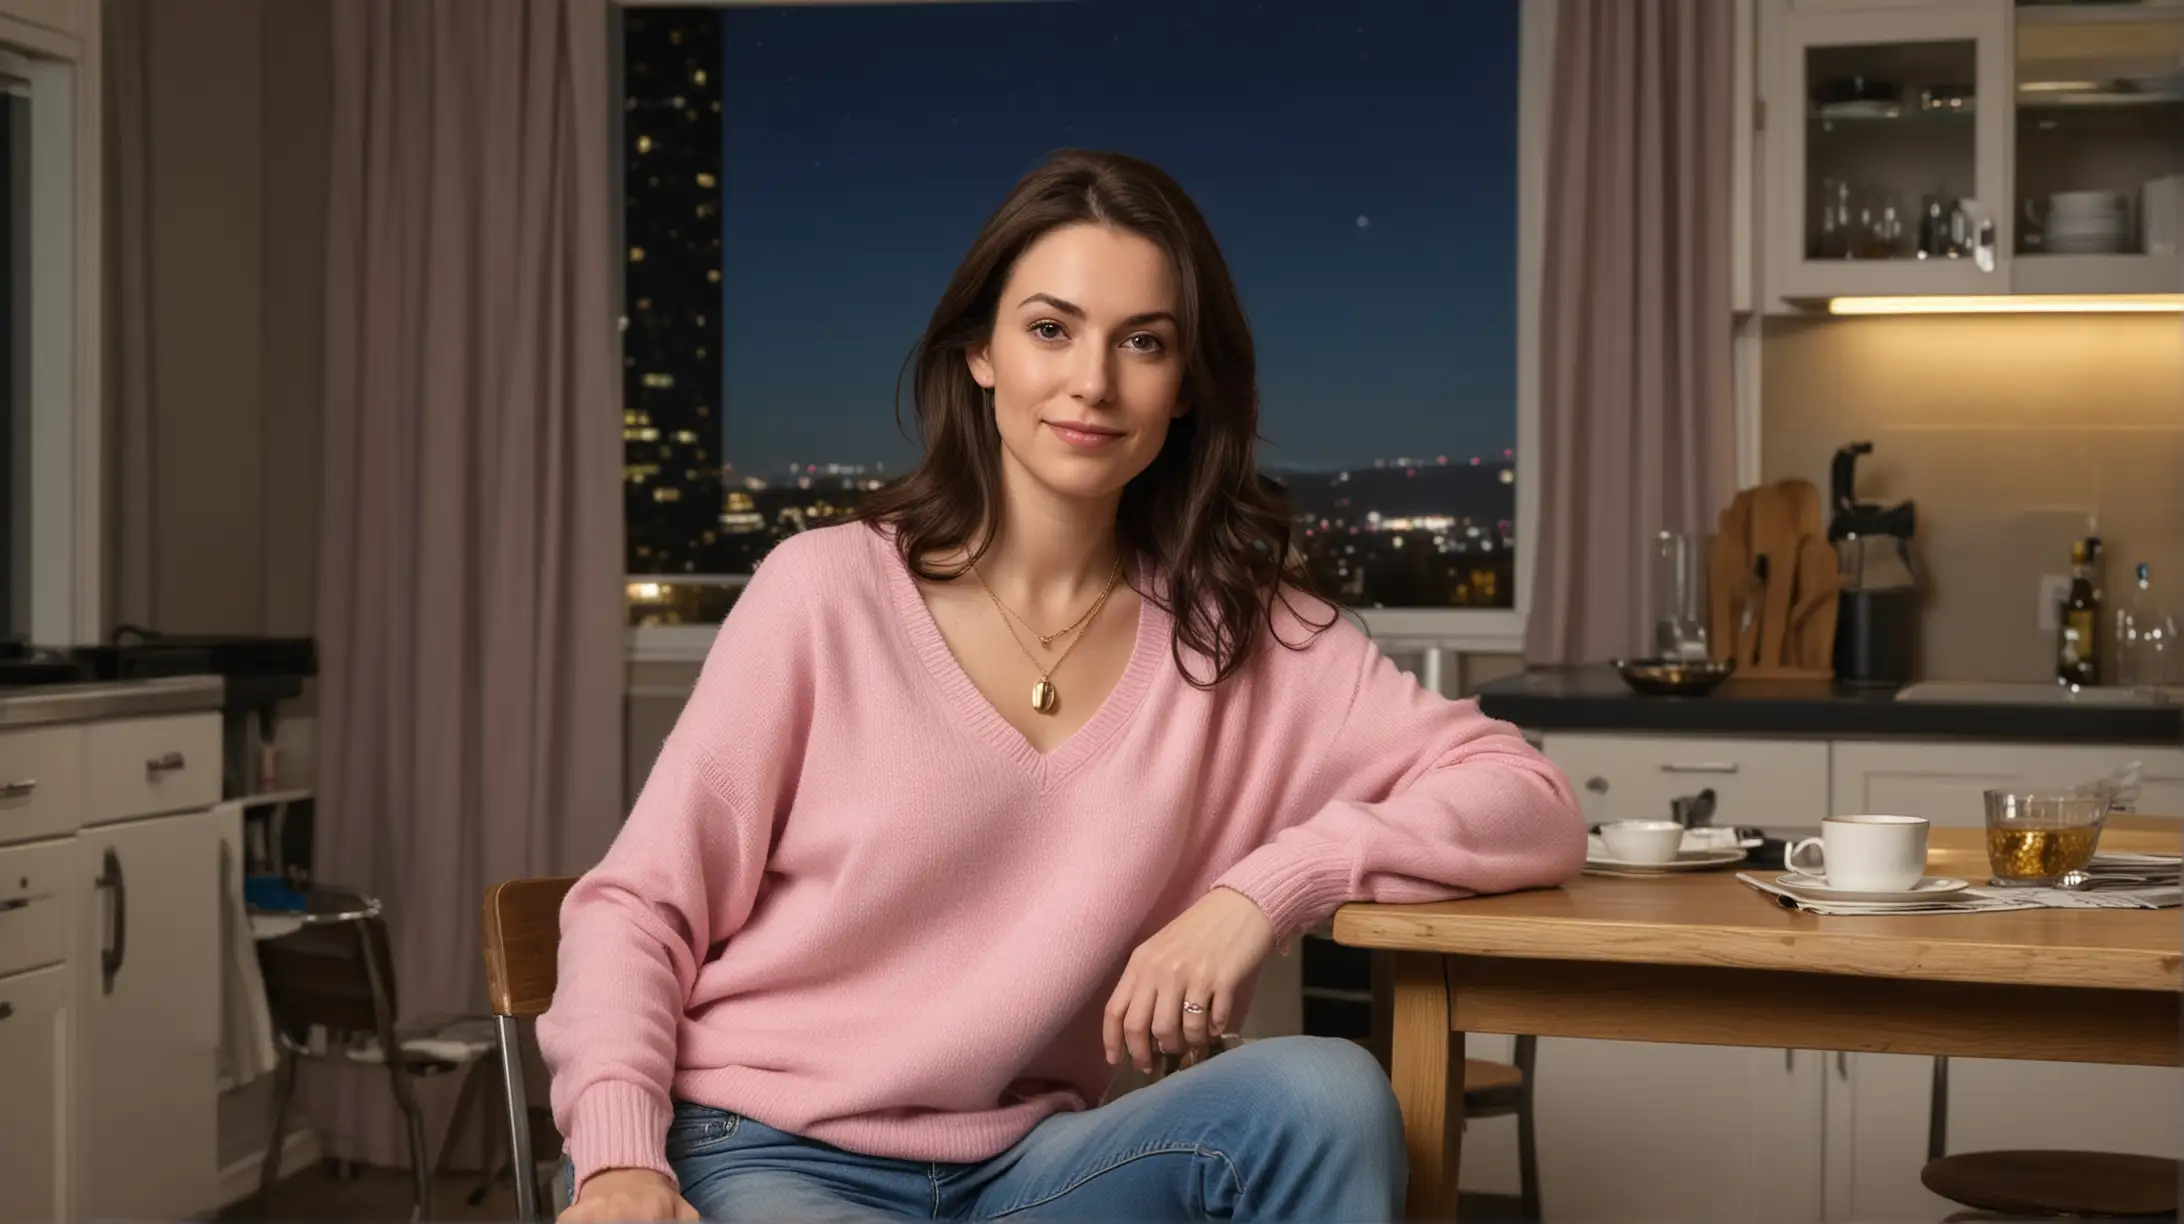 In a small kitchen at night, 33 year old pale relaxed white woman with long dark brown hair parted to the right sitting in a chair next to a empty table, wearing a pink sweater, blue jeans, and gold necklace. Generic night urban dense high rise background.